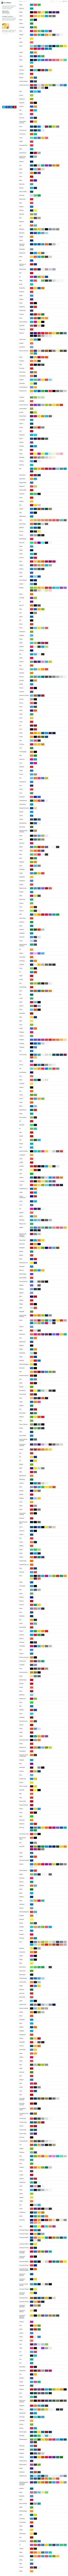 BrandColors | Official color codes for the world's biggest brands